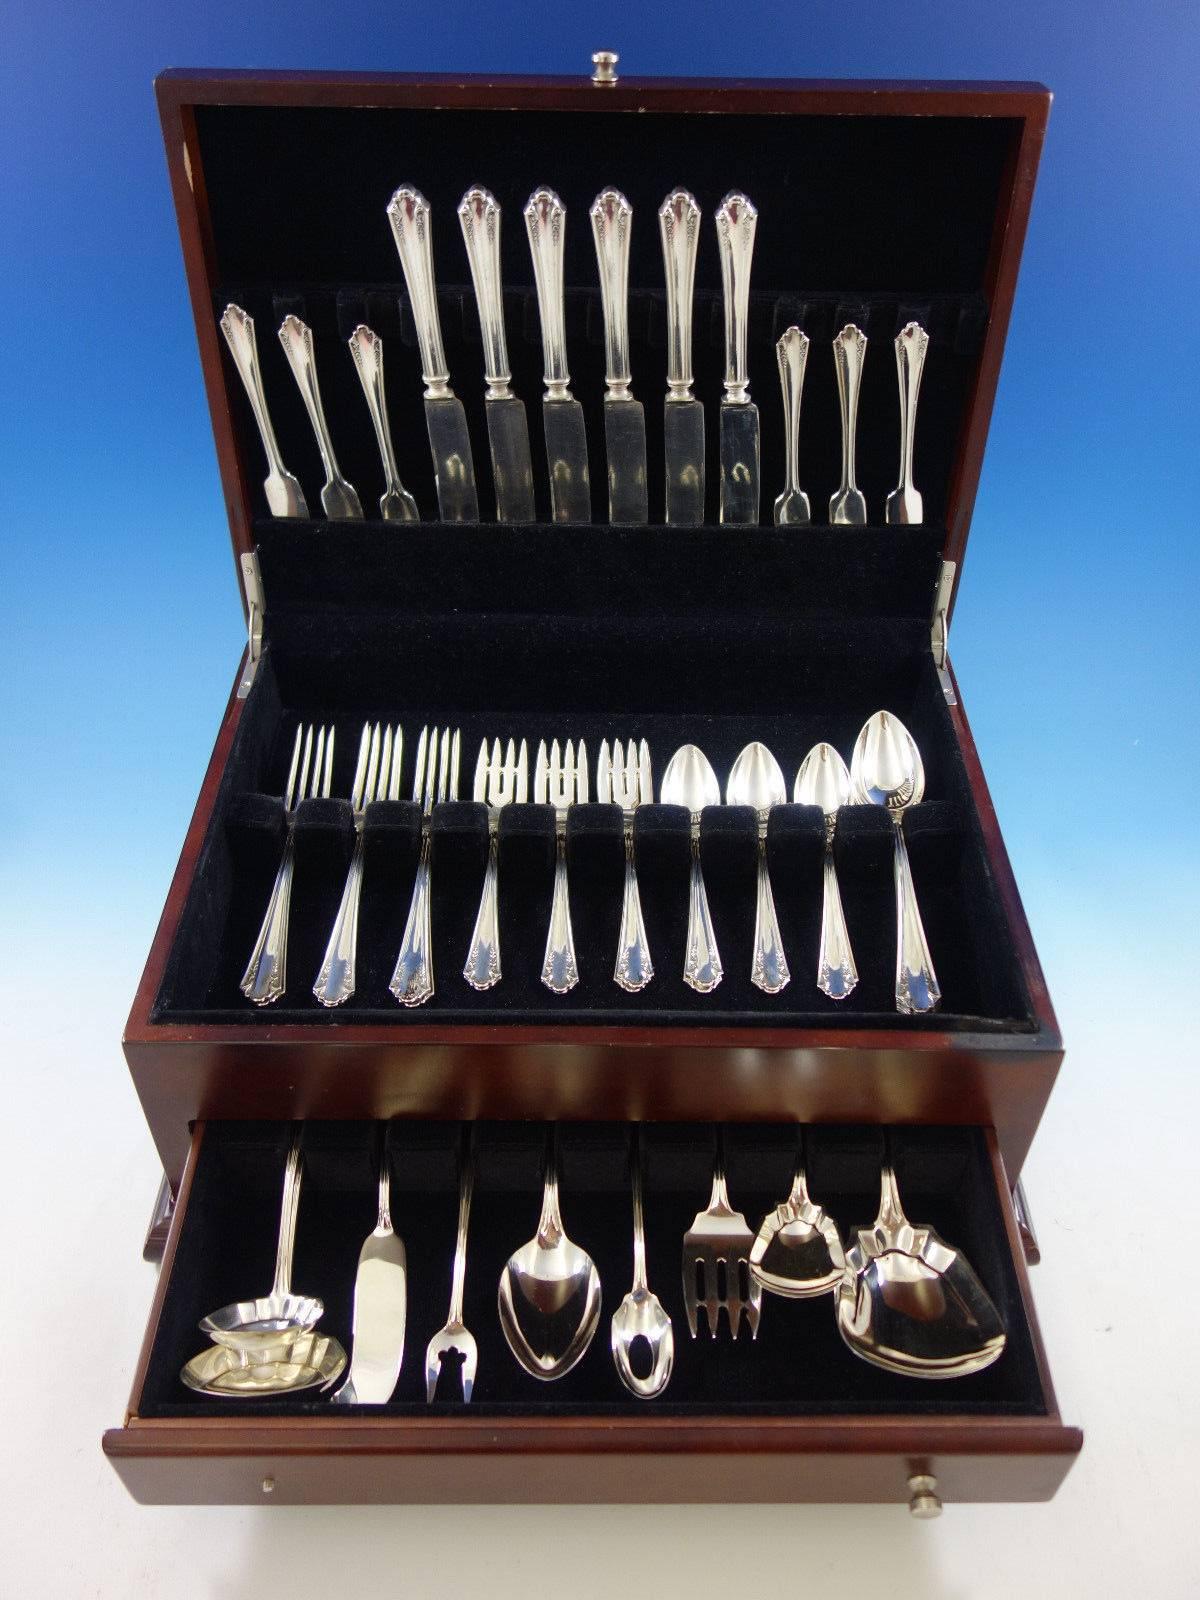 Rare Shenandoah by Alvin, circa 1912, sterling silver flatware set of 45 pieces. This set includes: 

Six knives, blunt silver plated blades, 8 7/8